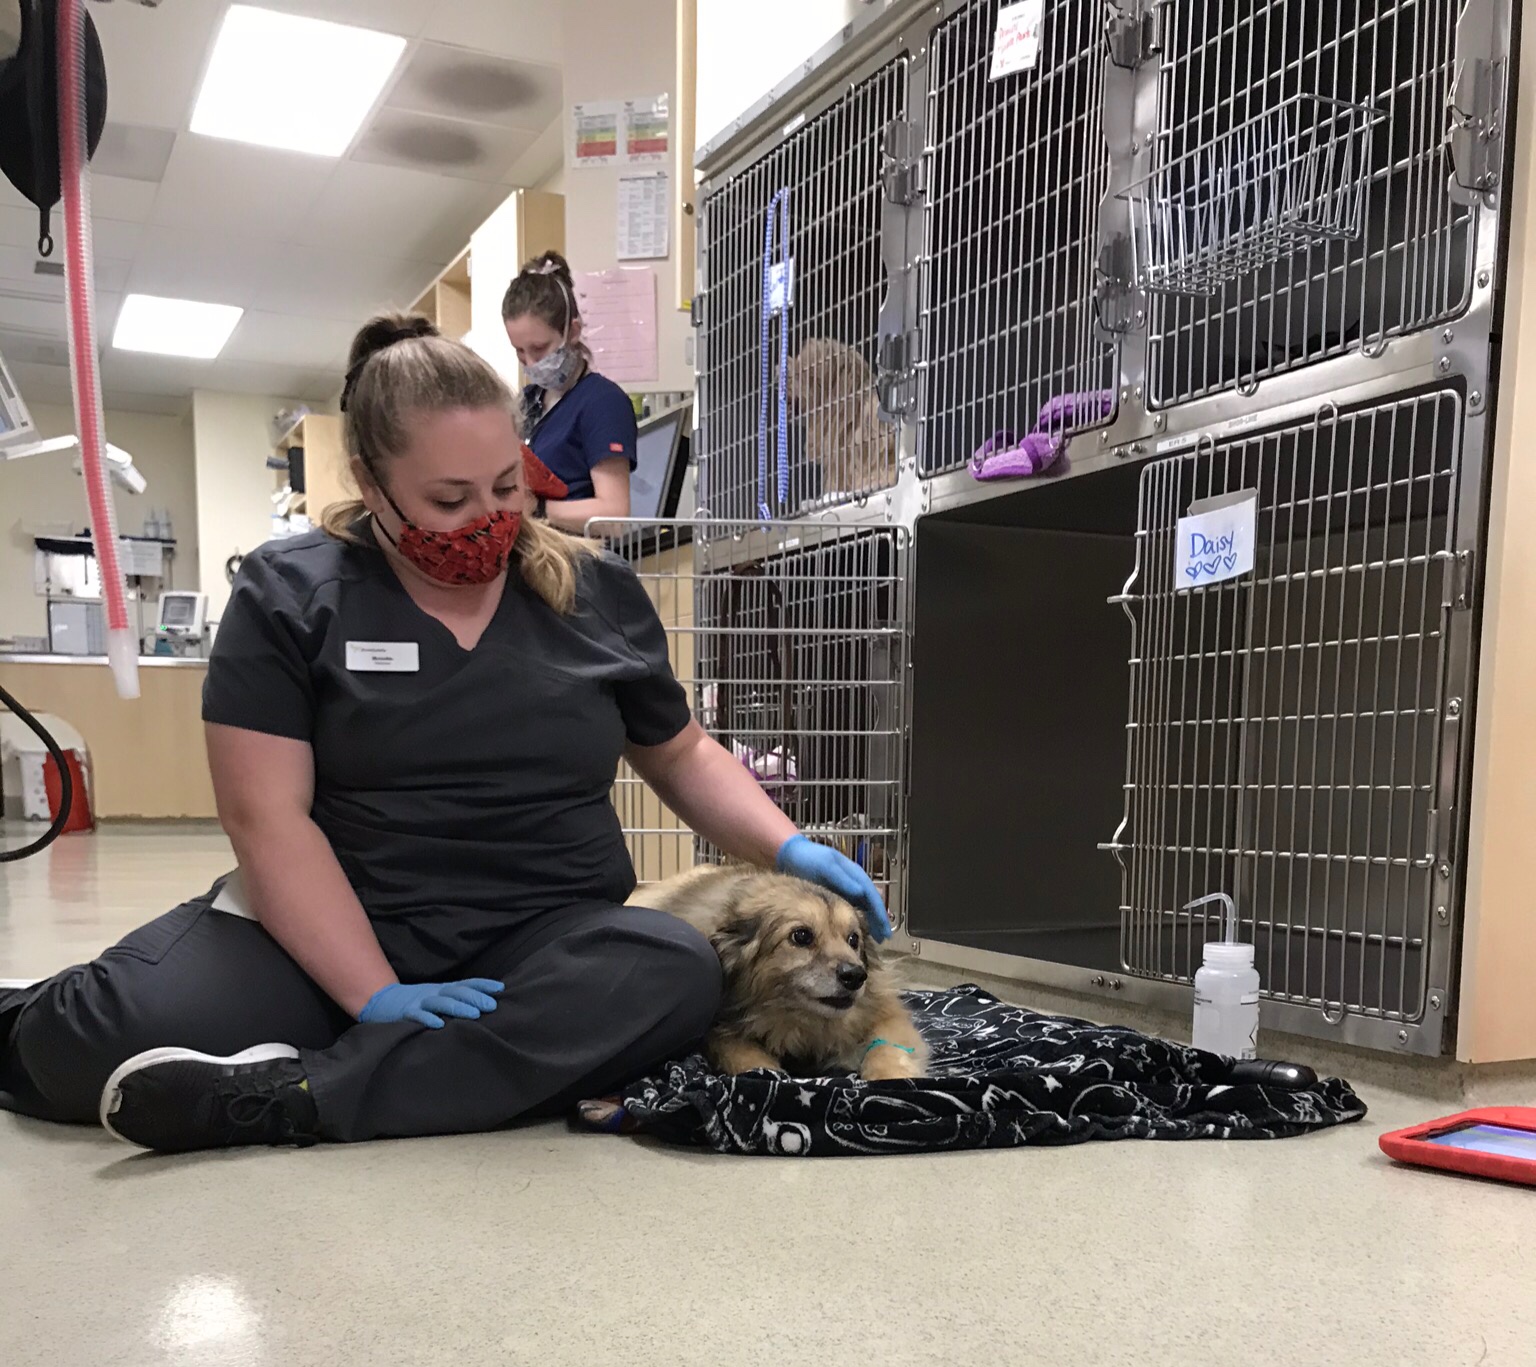 Oregon veterinary clinics resume non-emergency procedures, but pet care is  a long way from business-as-usual amid coronavirus crisis 